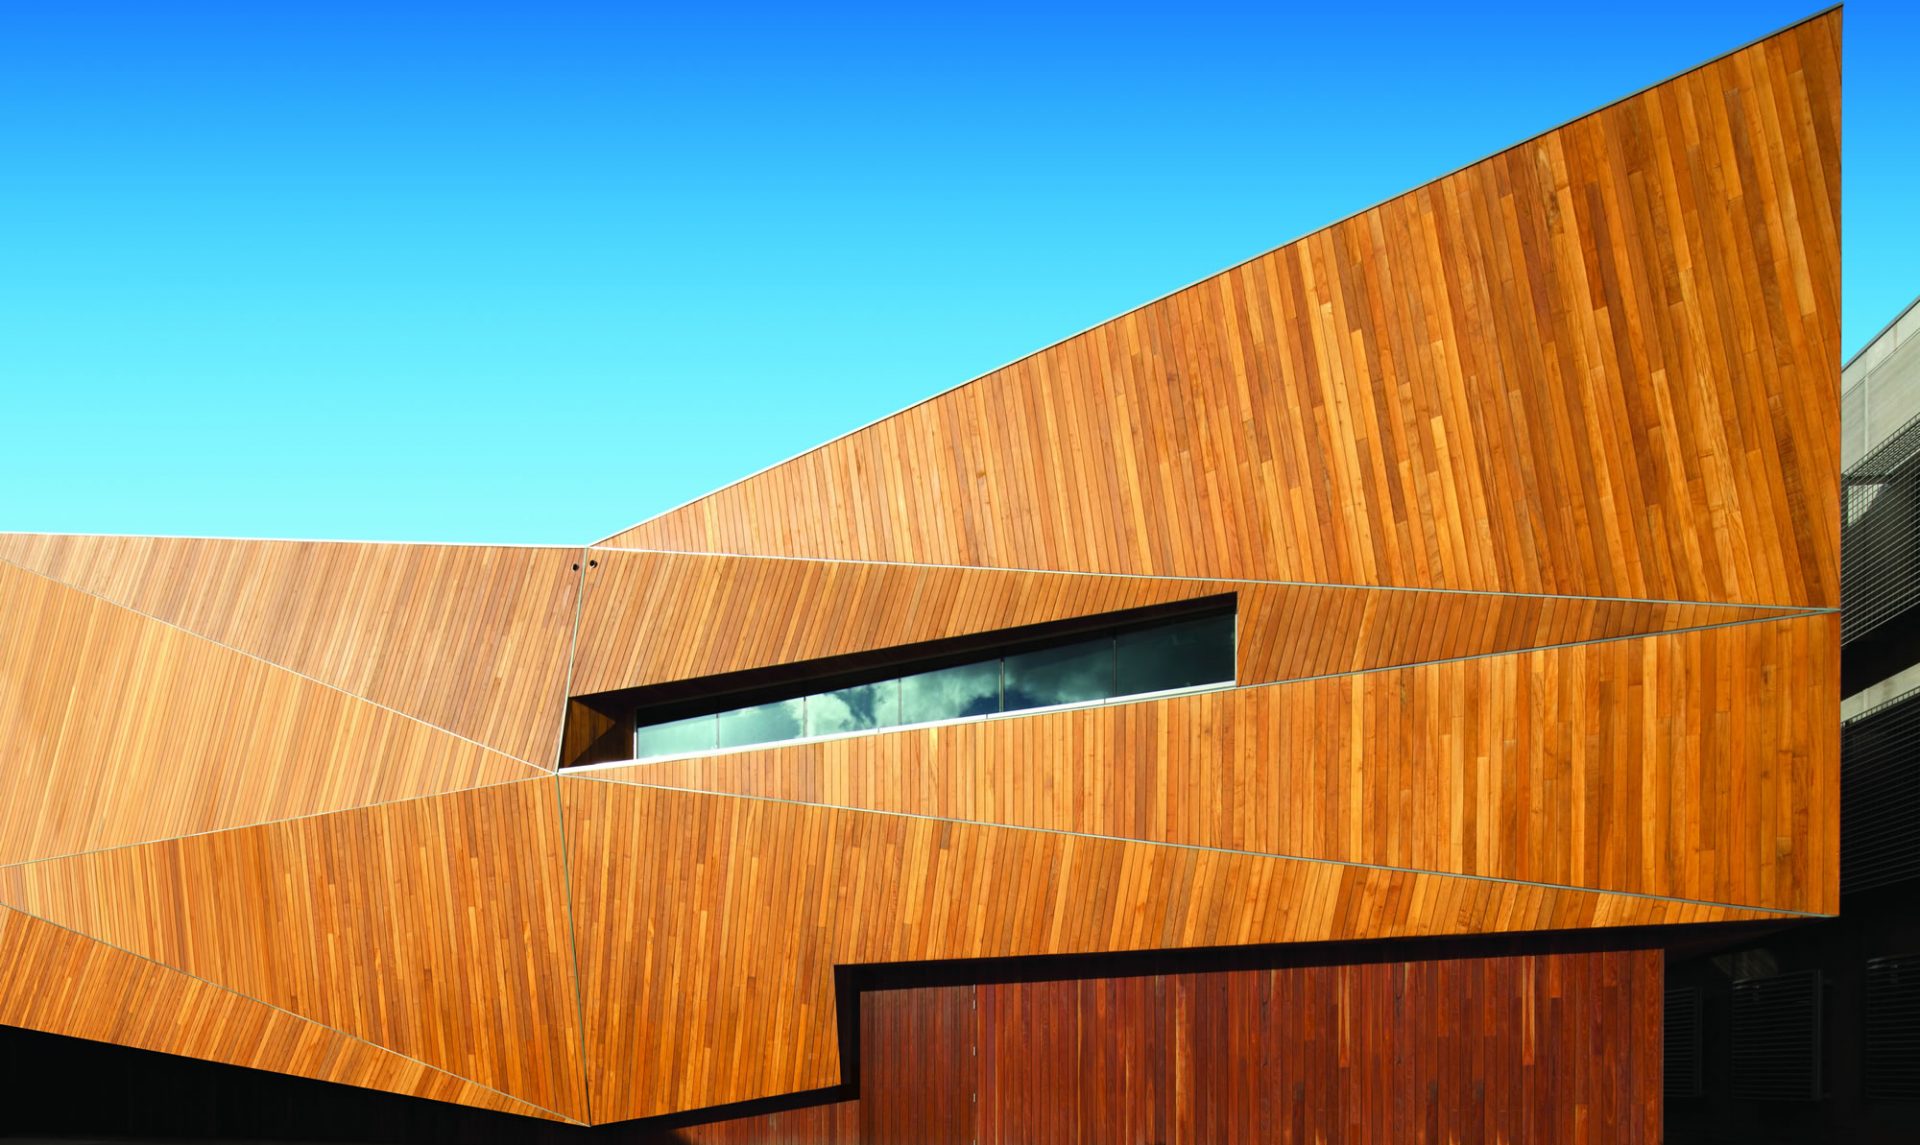 Exterior of architecturally designed house with a slanted dark timber roof